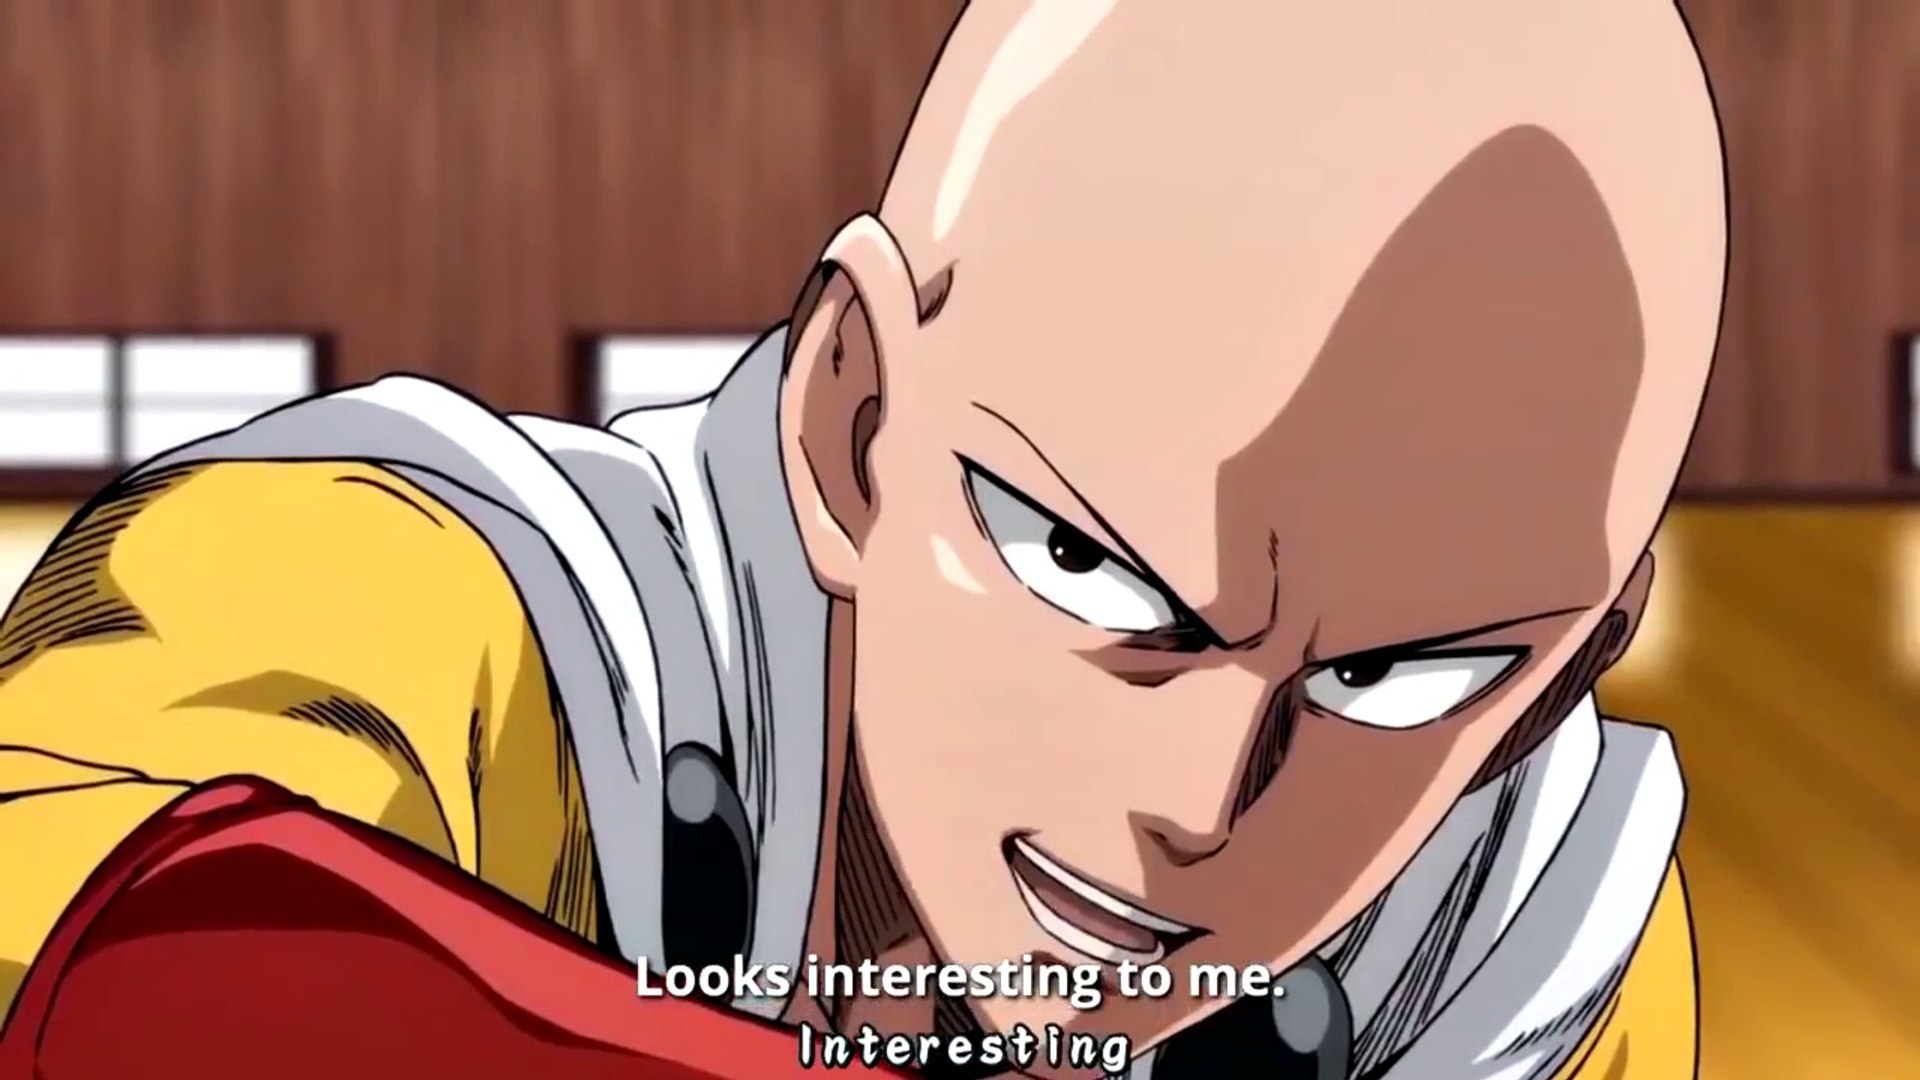 onepunchman #rockpaperscissors THIS A SPECIAL ONE PUNCH MAN WEB:anime